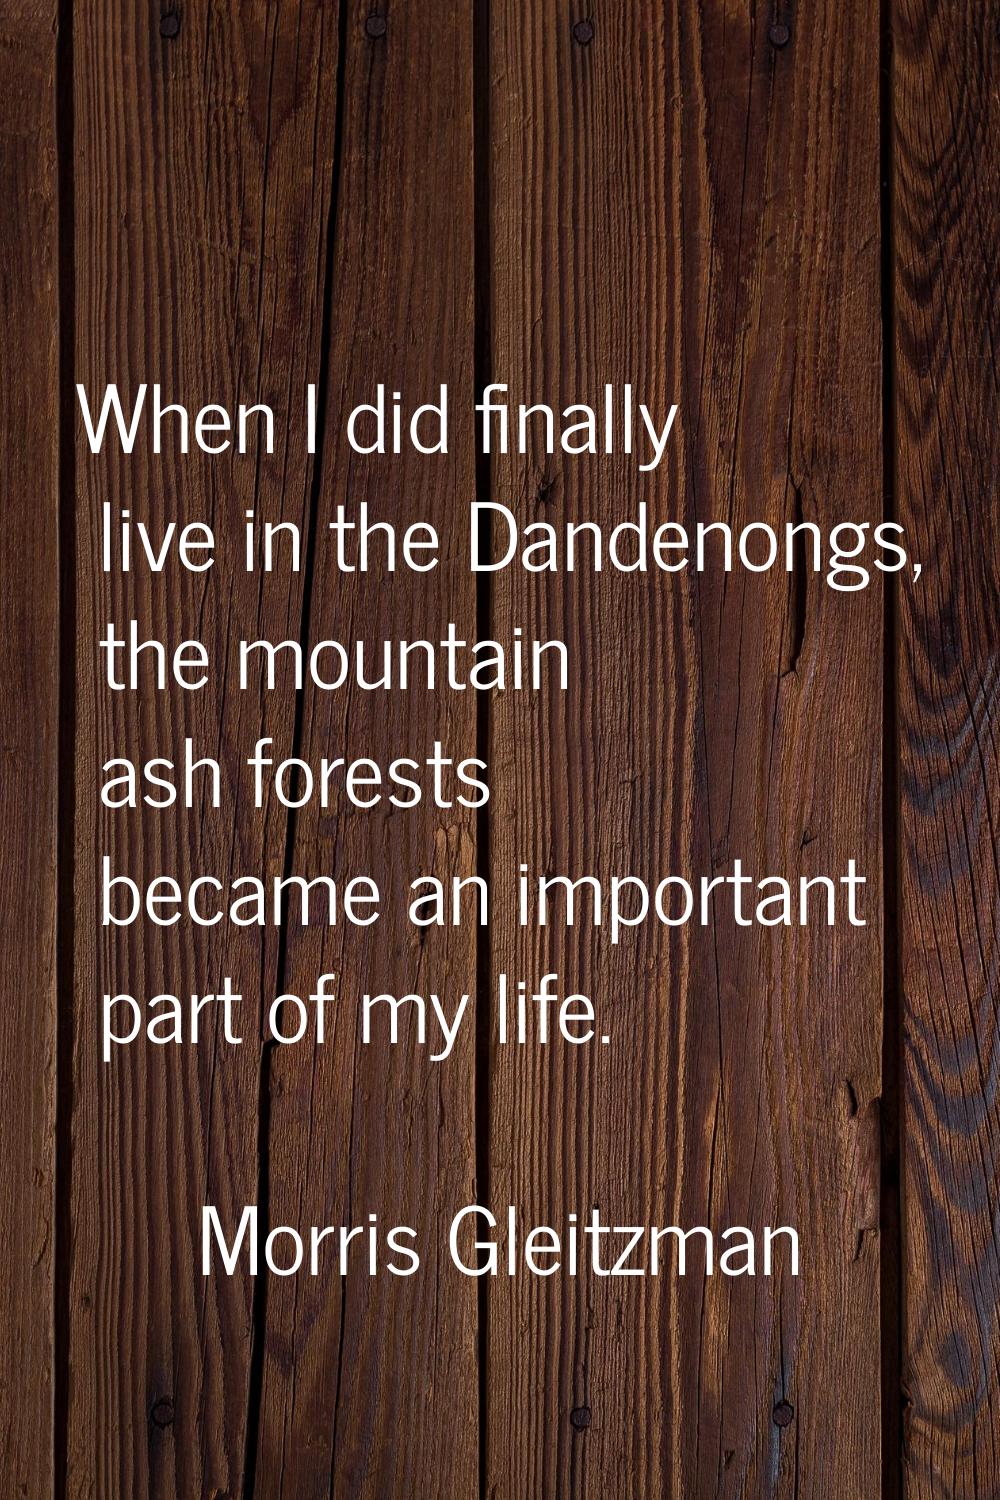 When I did finally live in the Dandenongs, the mountain ash forests became an important part of my 